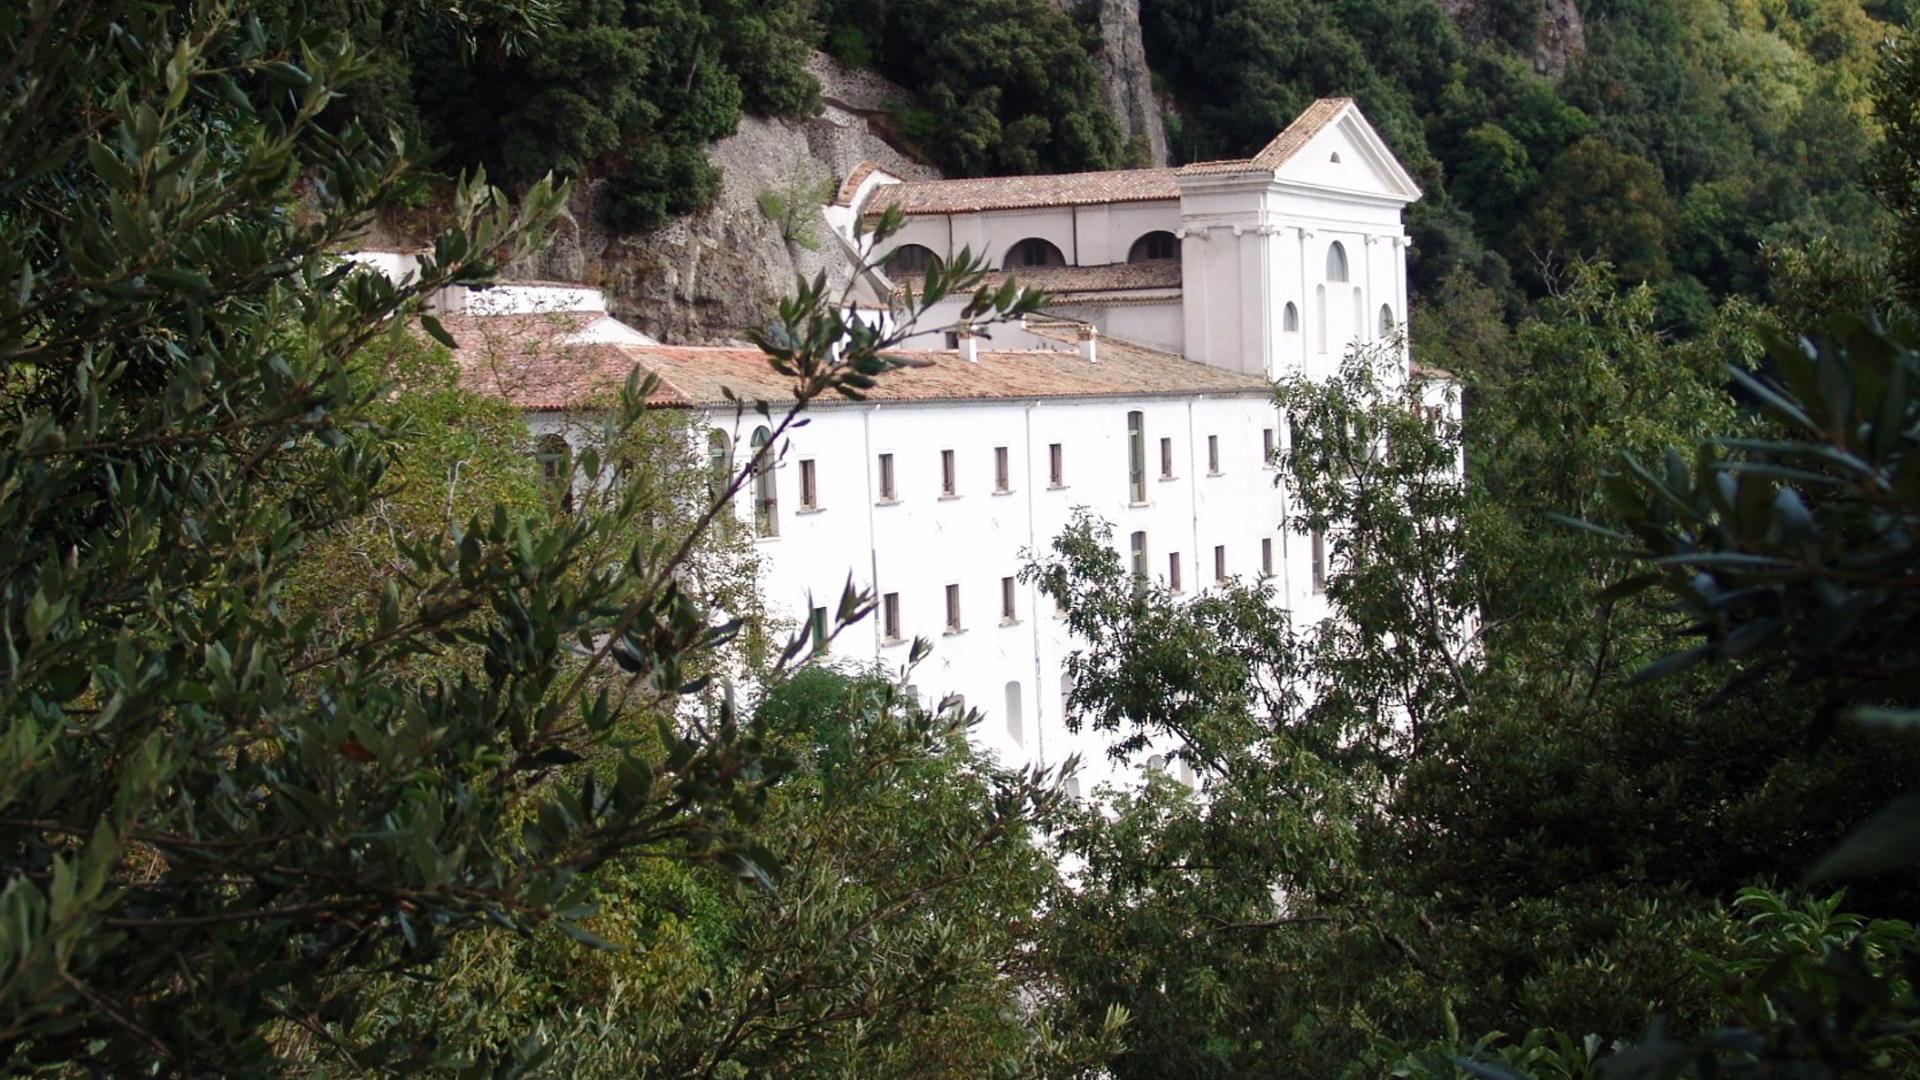 The Convent of San Michele